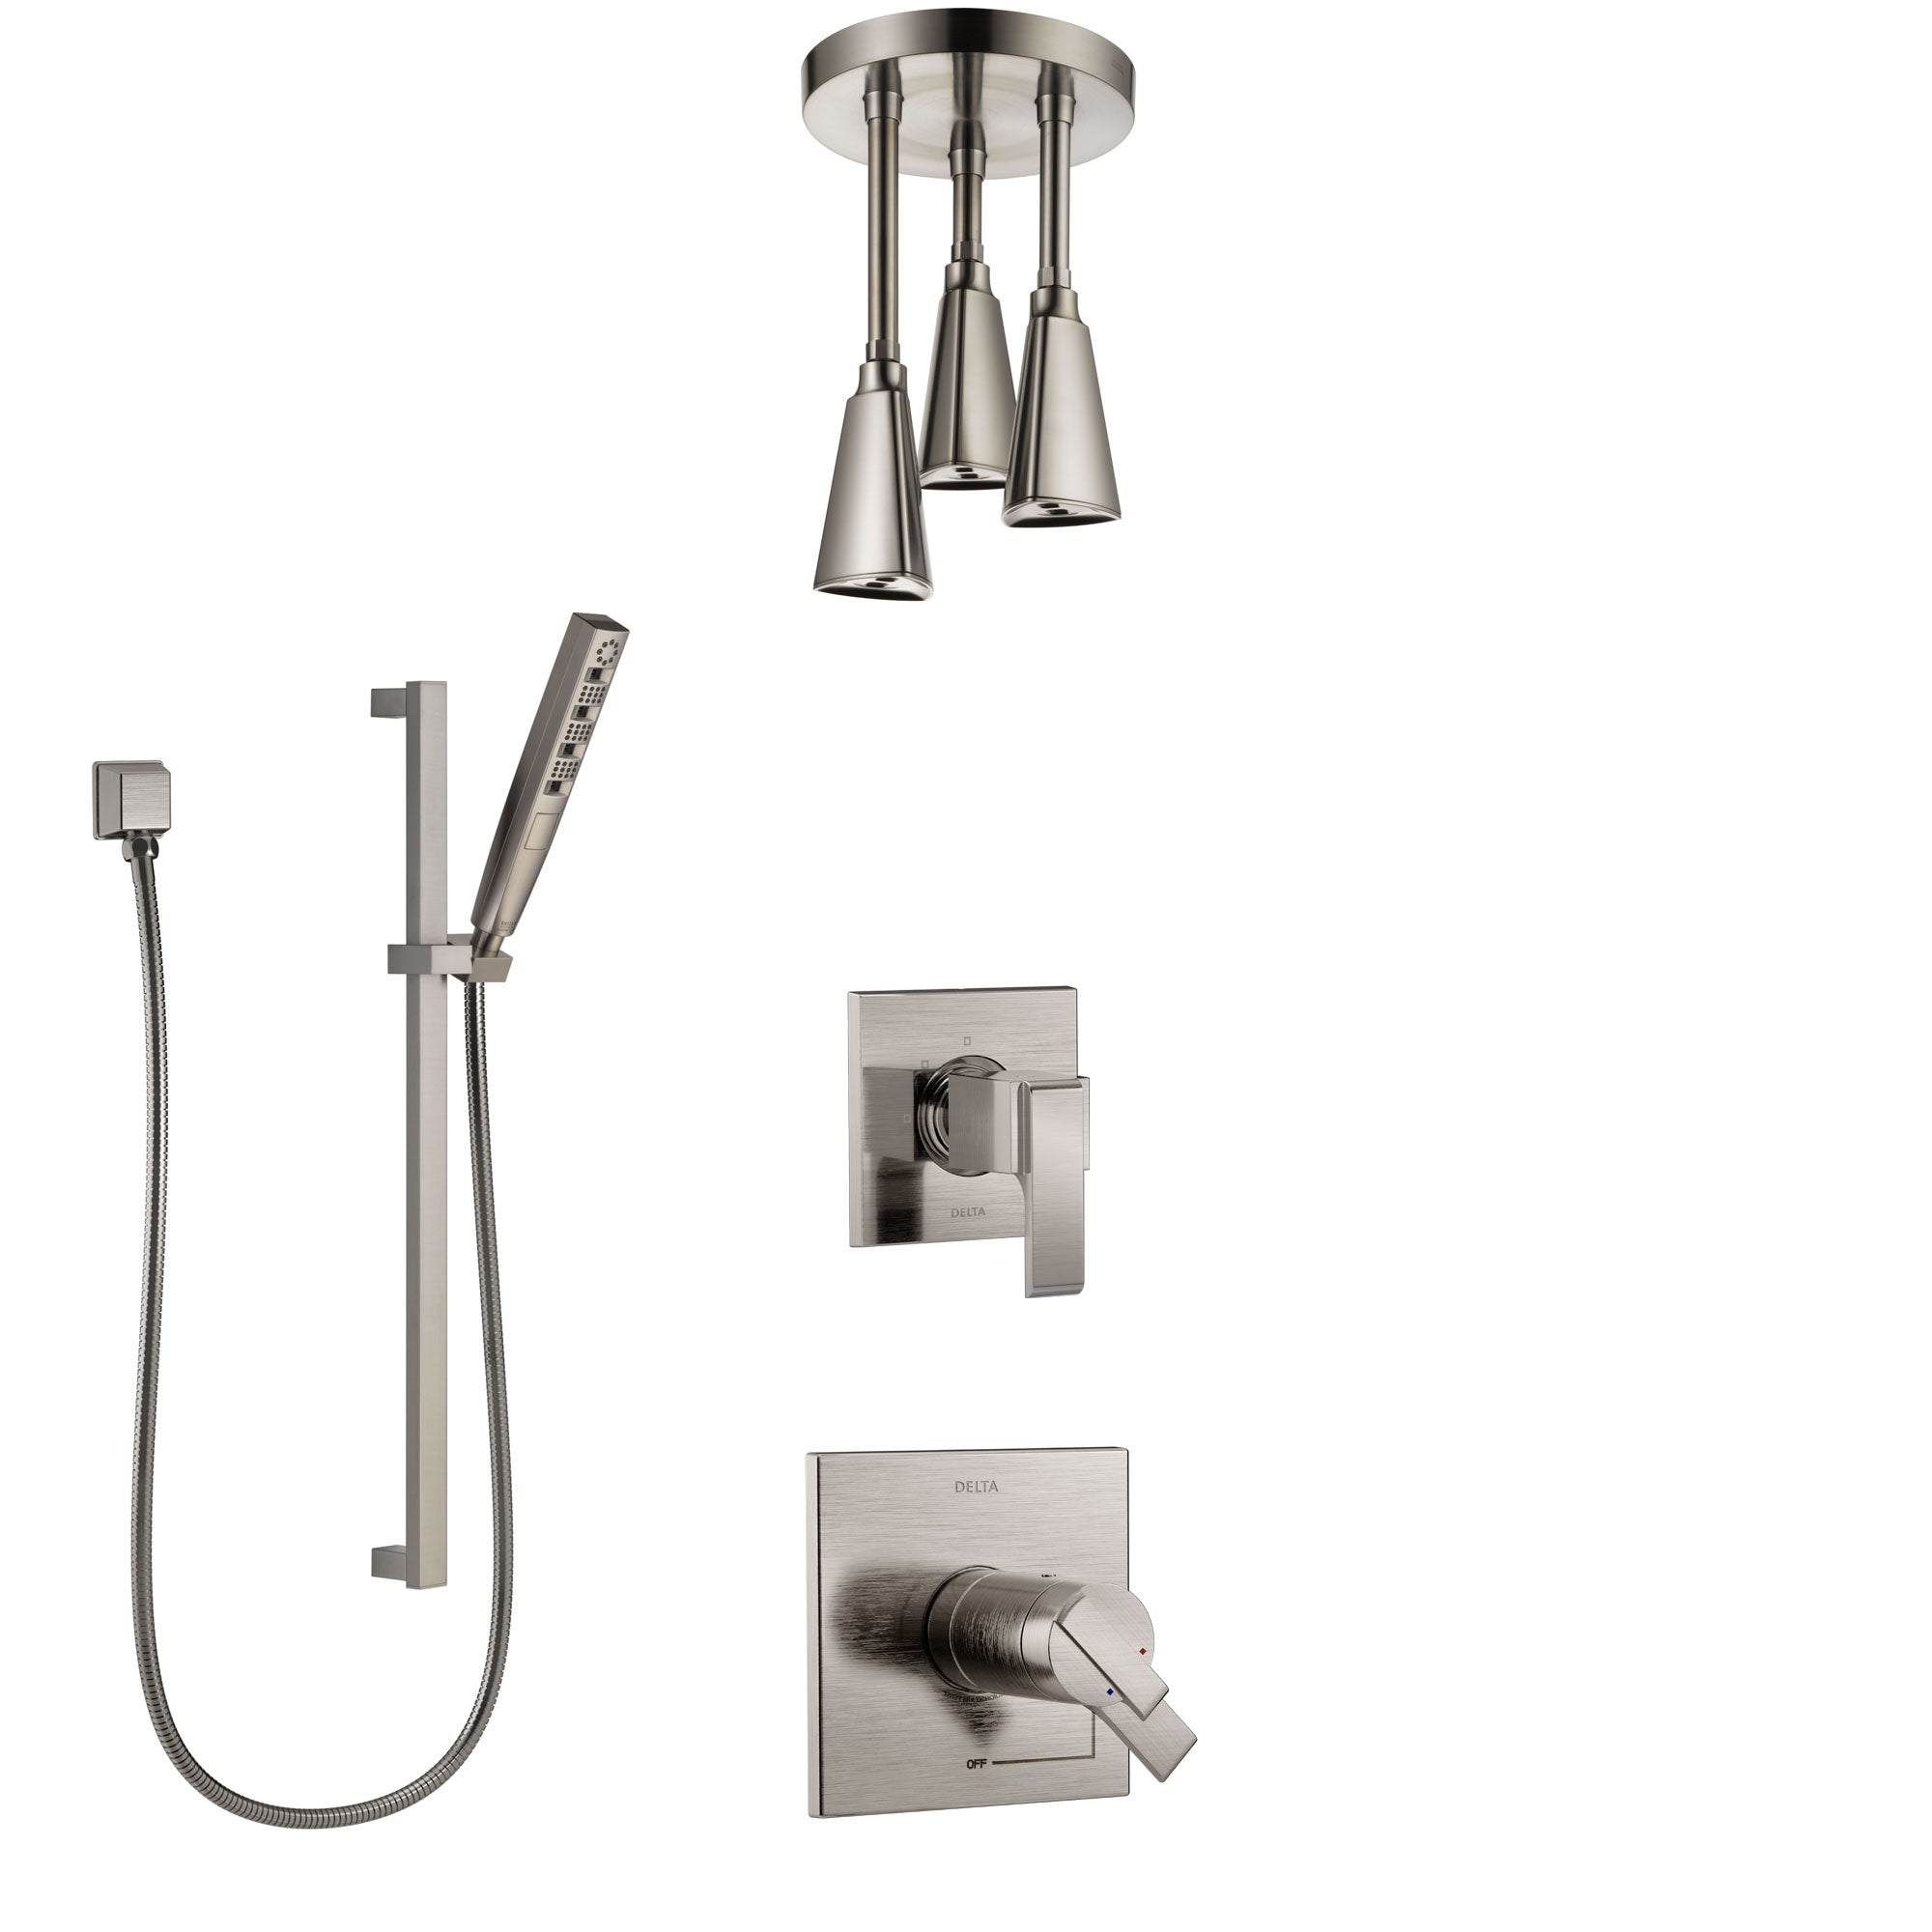 Delta Ara Dual Thermostatic Control Handle Stainless Steel Finish Shower System, Diverter, Ceiling Mount Showerhead, and Hand Shower SS17T672SS6